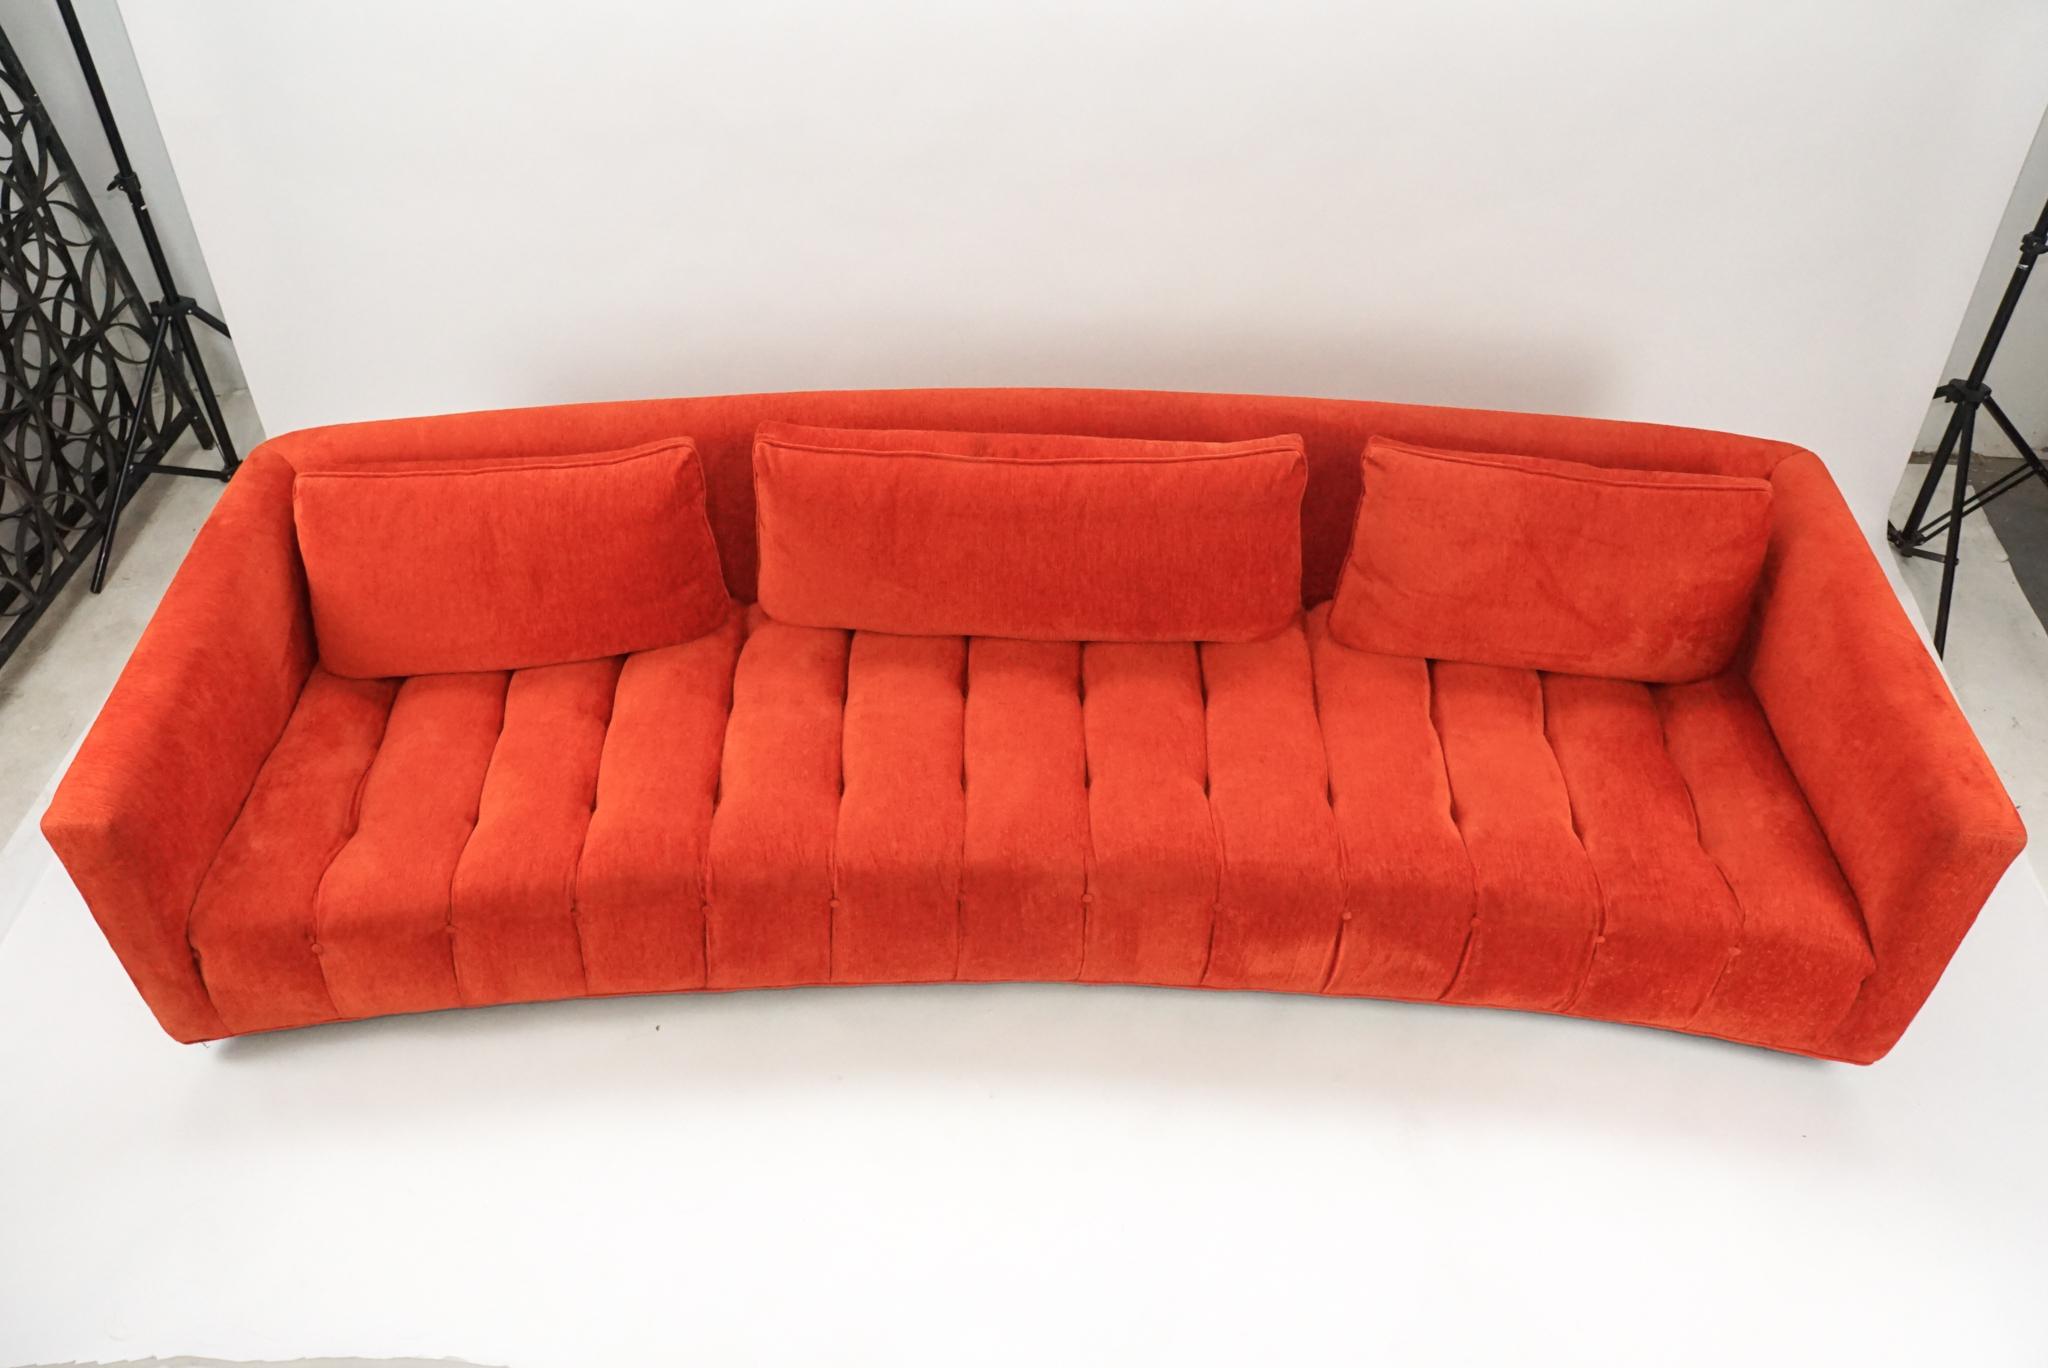 Sculptural curved sofa by Erwin-Lambeth. This piece was recovered a few years back in a stunning red chenille type upholstery. The bottom of the sofa was done in blue! Attention to detail is incredible. This piece is a real showstopper on top of